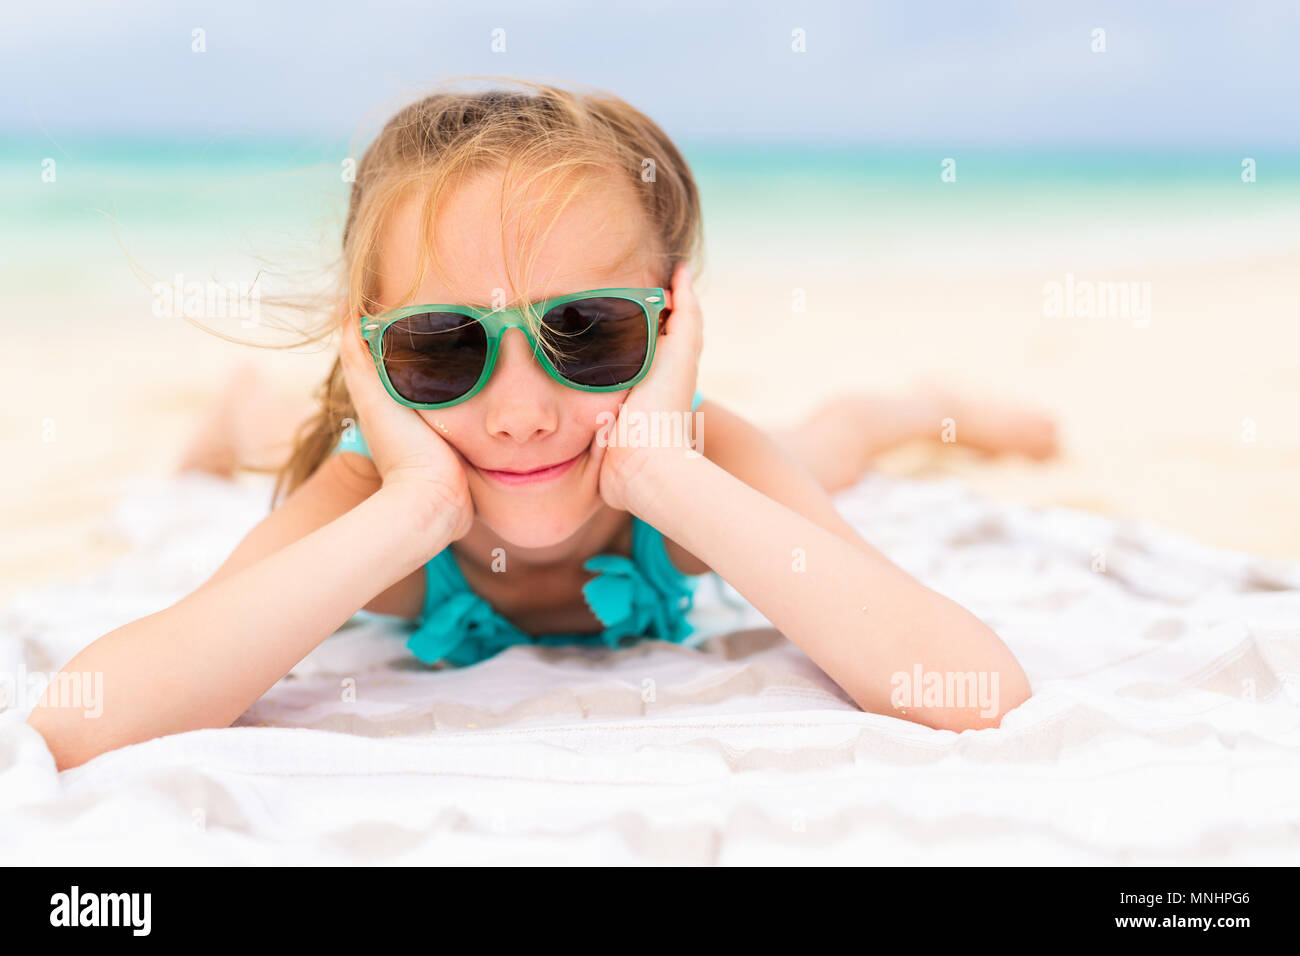 Adorable little girl lying on a beach towel during summer vacation Stock Photo